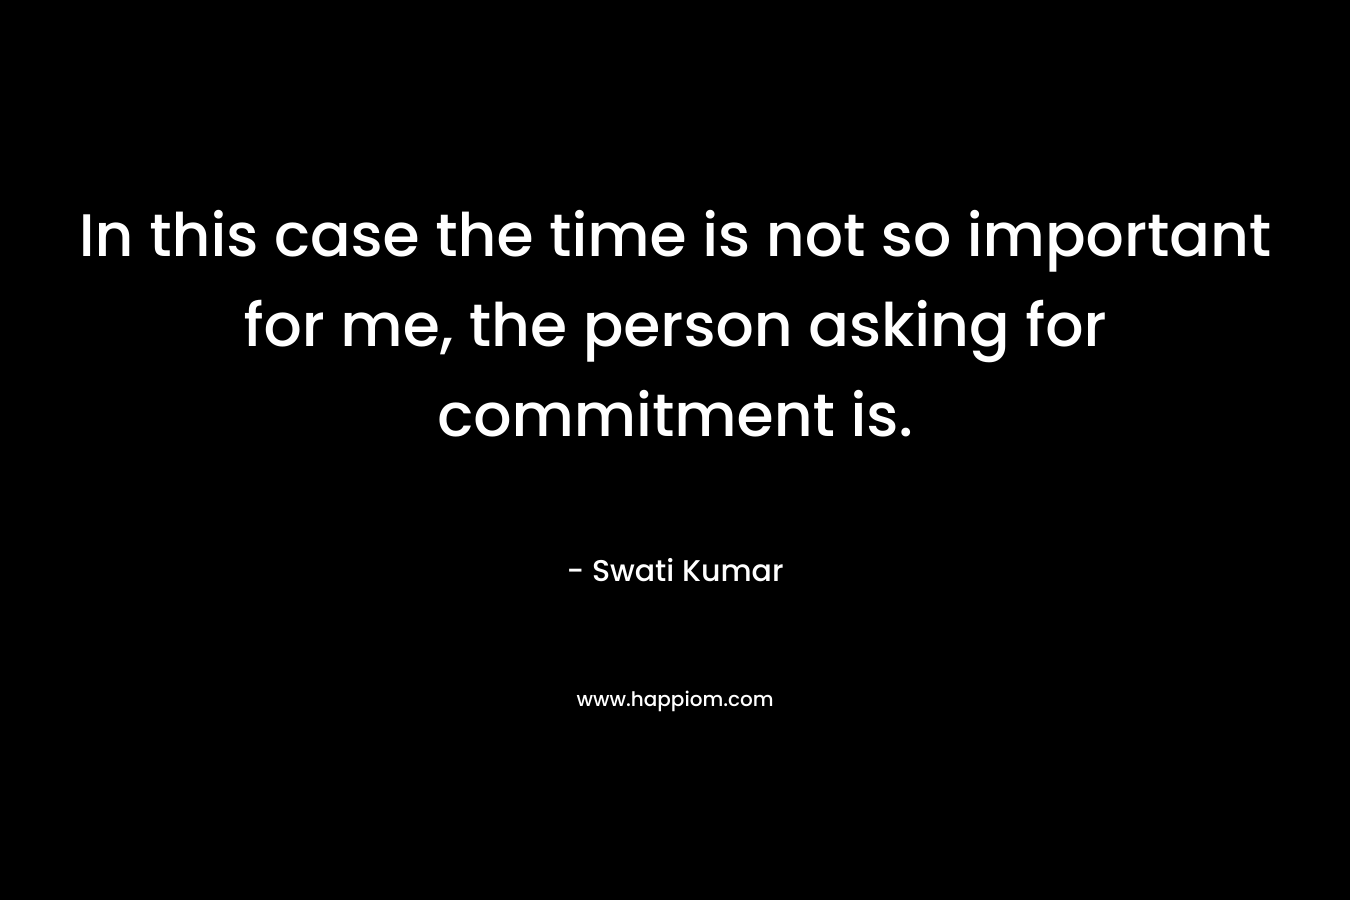 In this case the time is not so important for me, the person asking for commitment is. – Swati Kumar